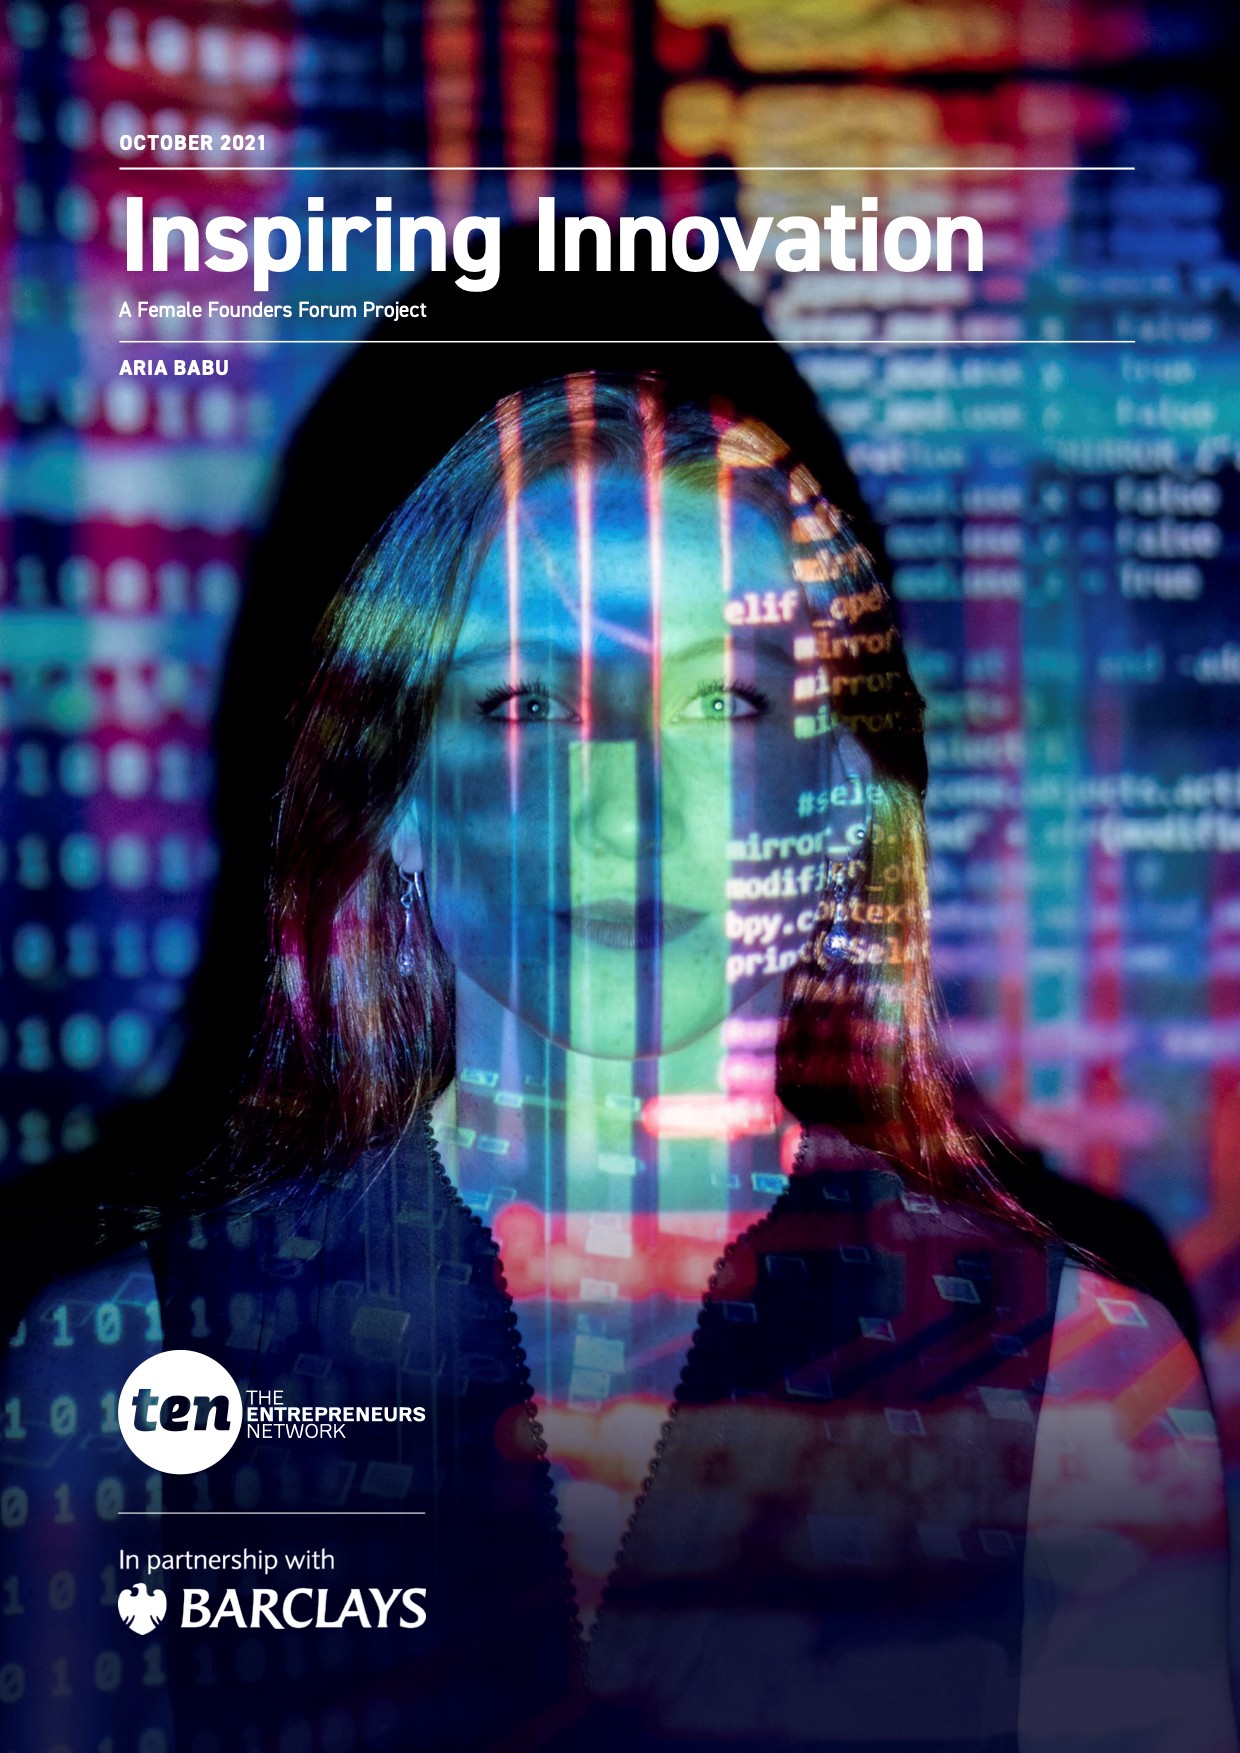 The 'Inspiring Innovation' report cover